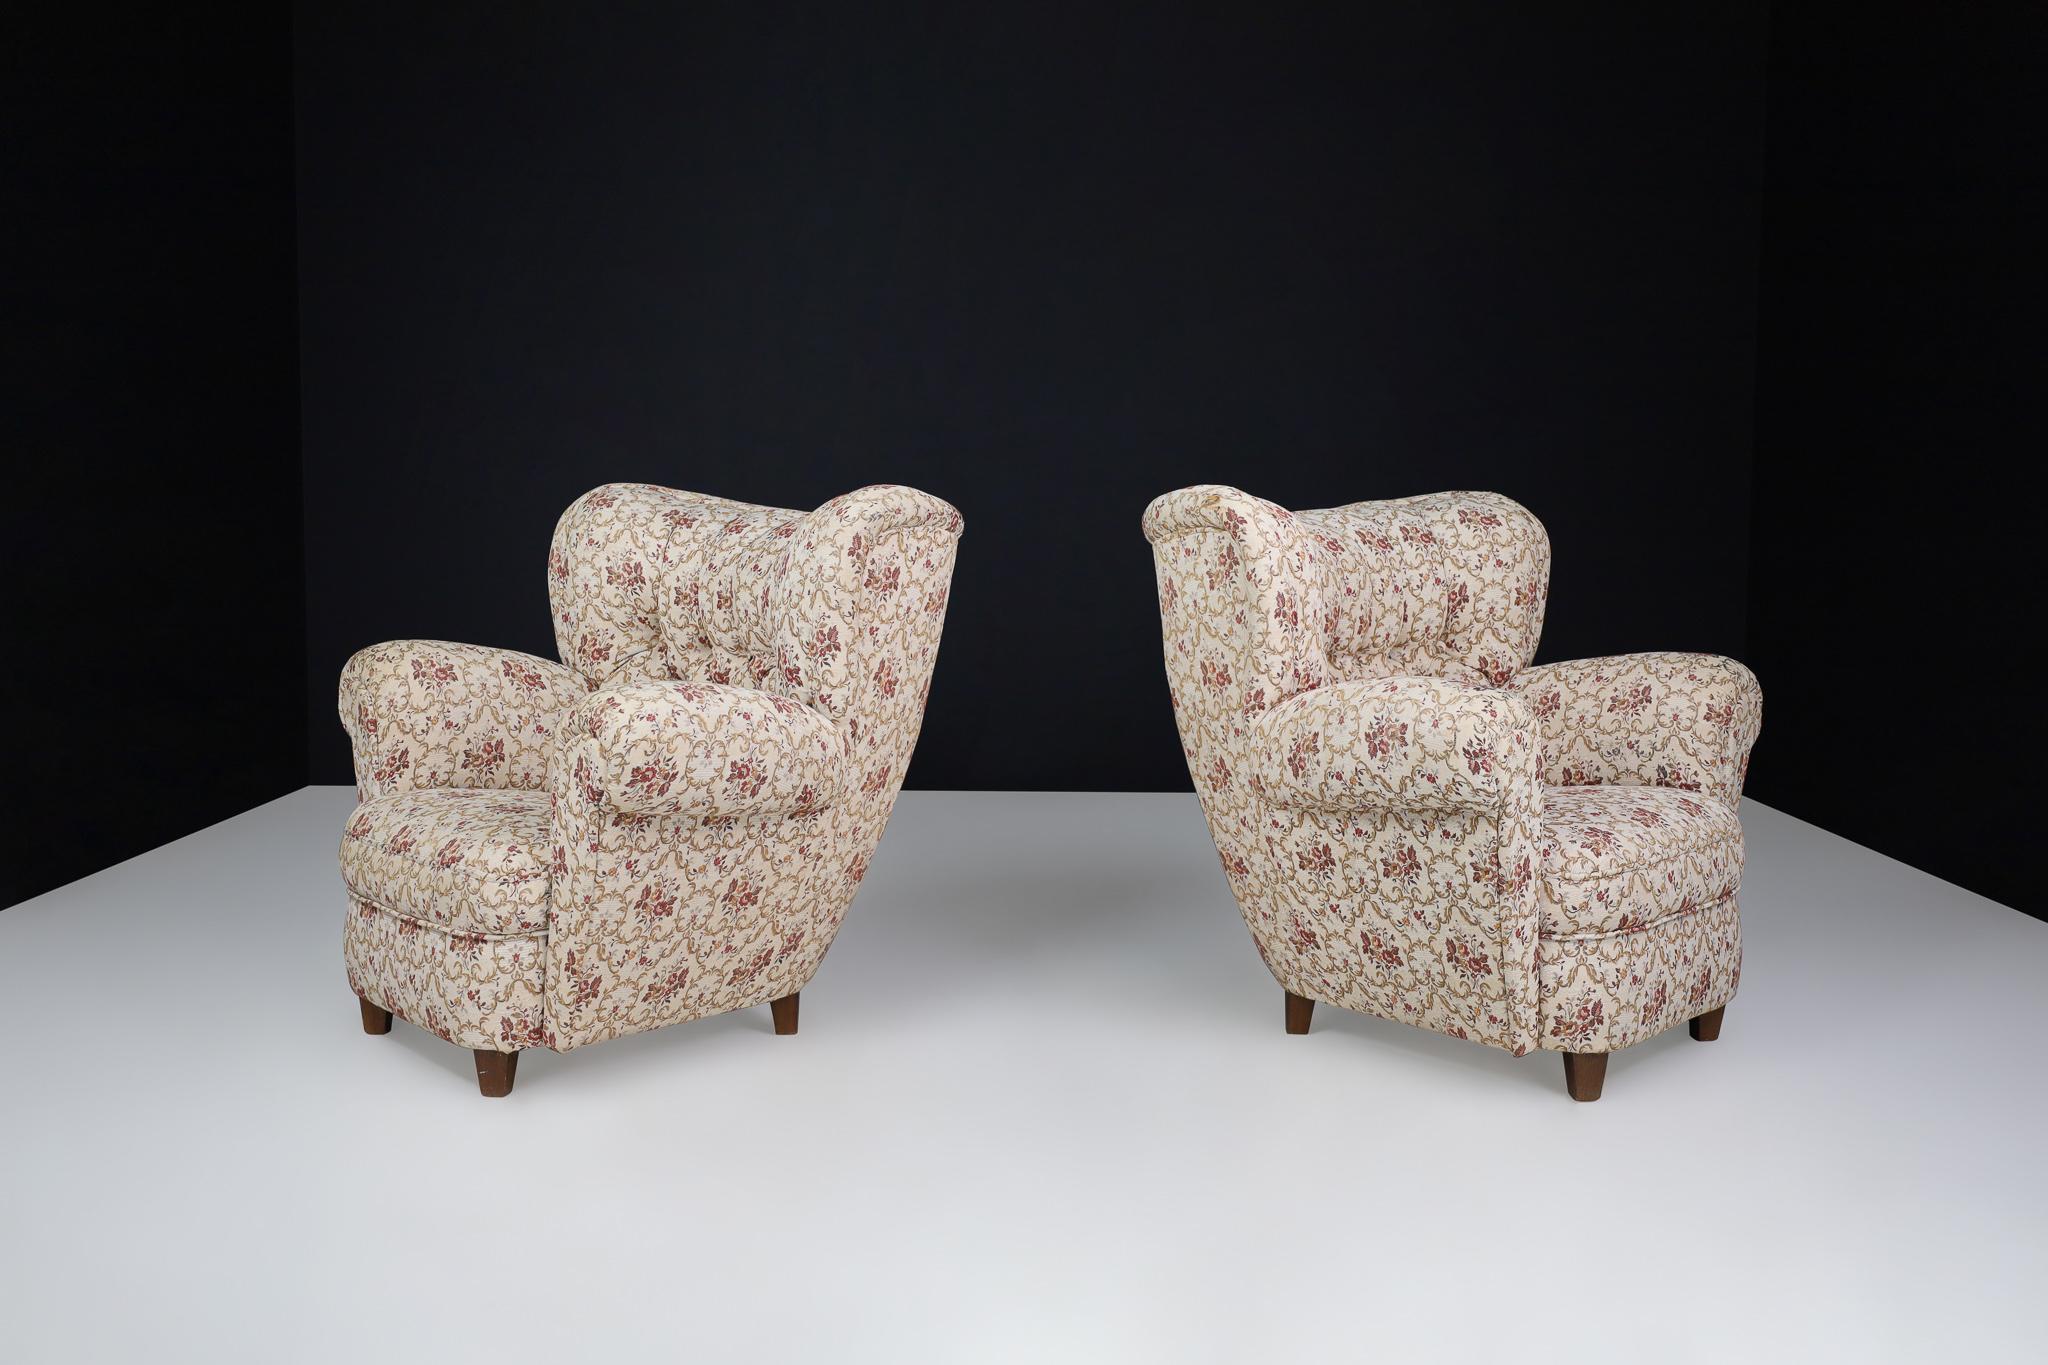 Large Art-Deco Pair Armchairs in Original Floral Upholstery, Praque 1930

These large Art Deco armchairs were crafted in Prague during the 1930s and still feature their original floral upholstery. Their soft edges, tufted lines, and sturdy design